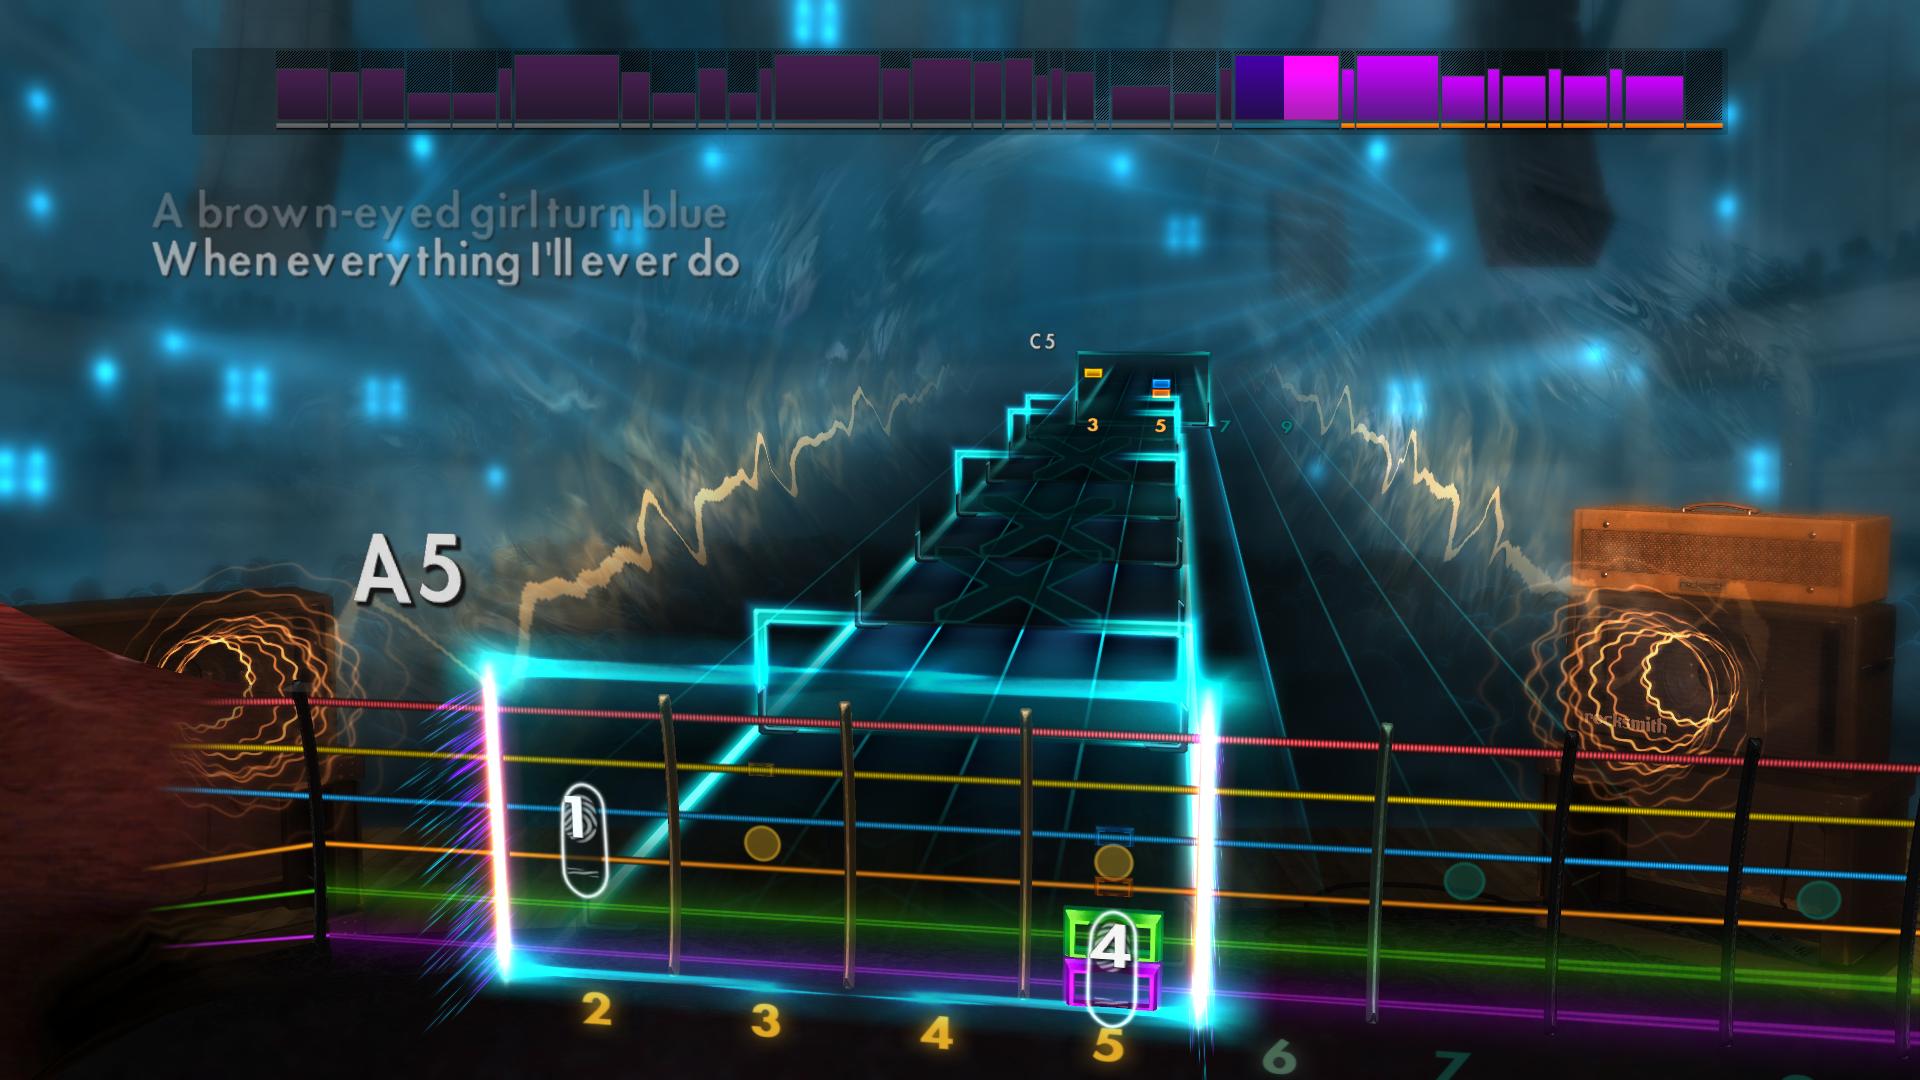 Rocksmith® 2014 Edition – Remastered – Roxette Song Pack